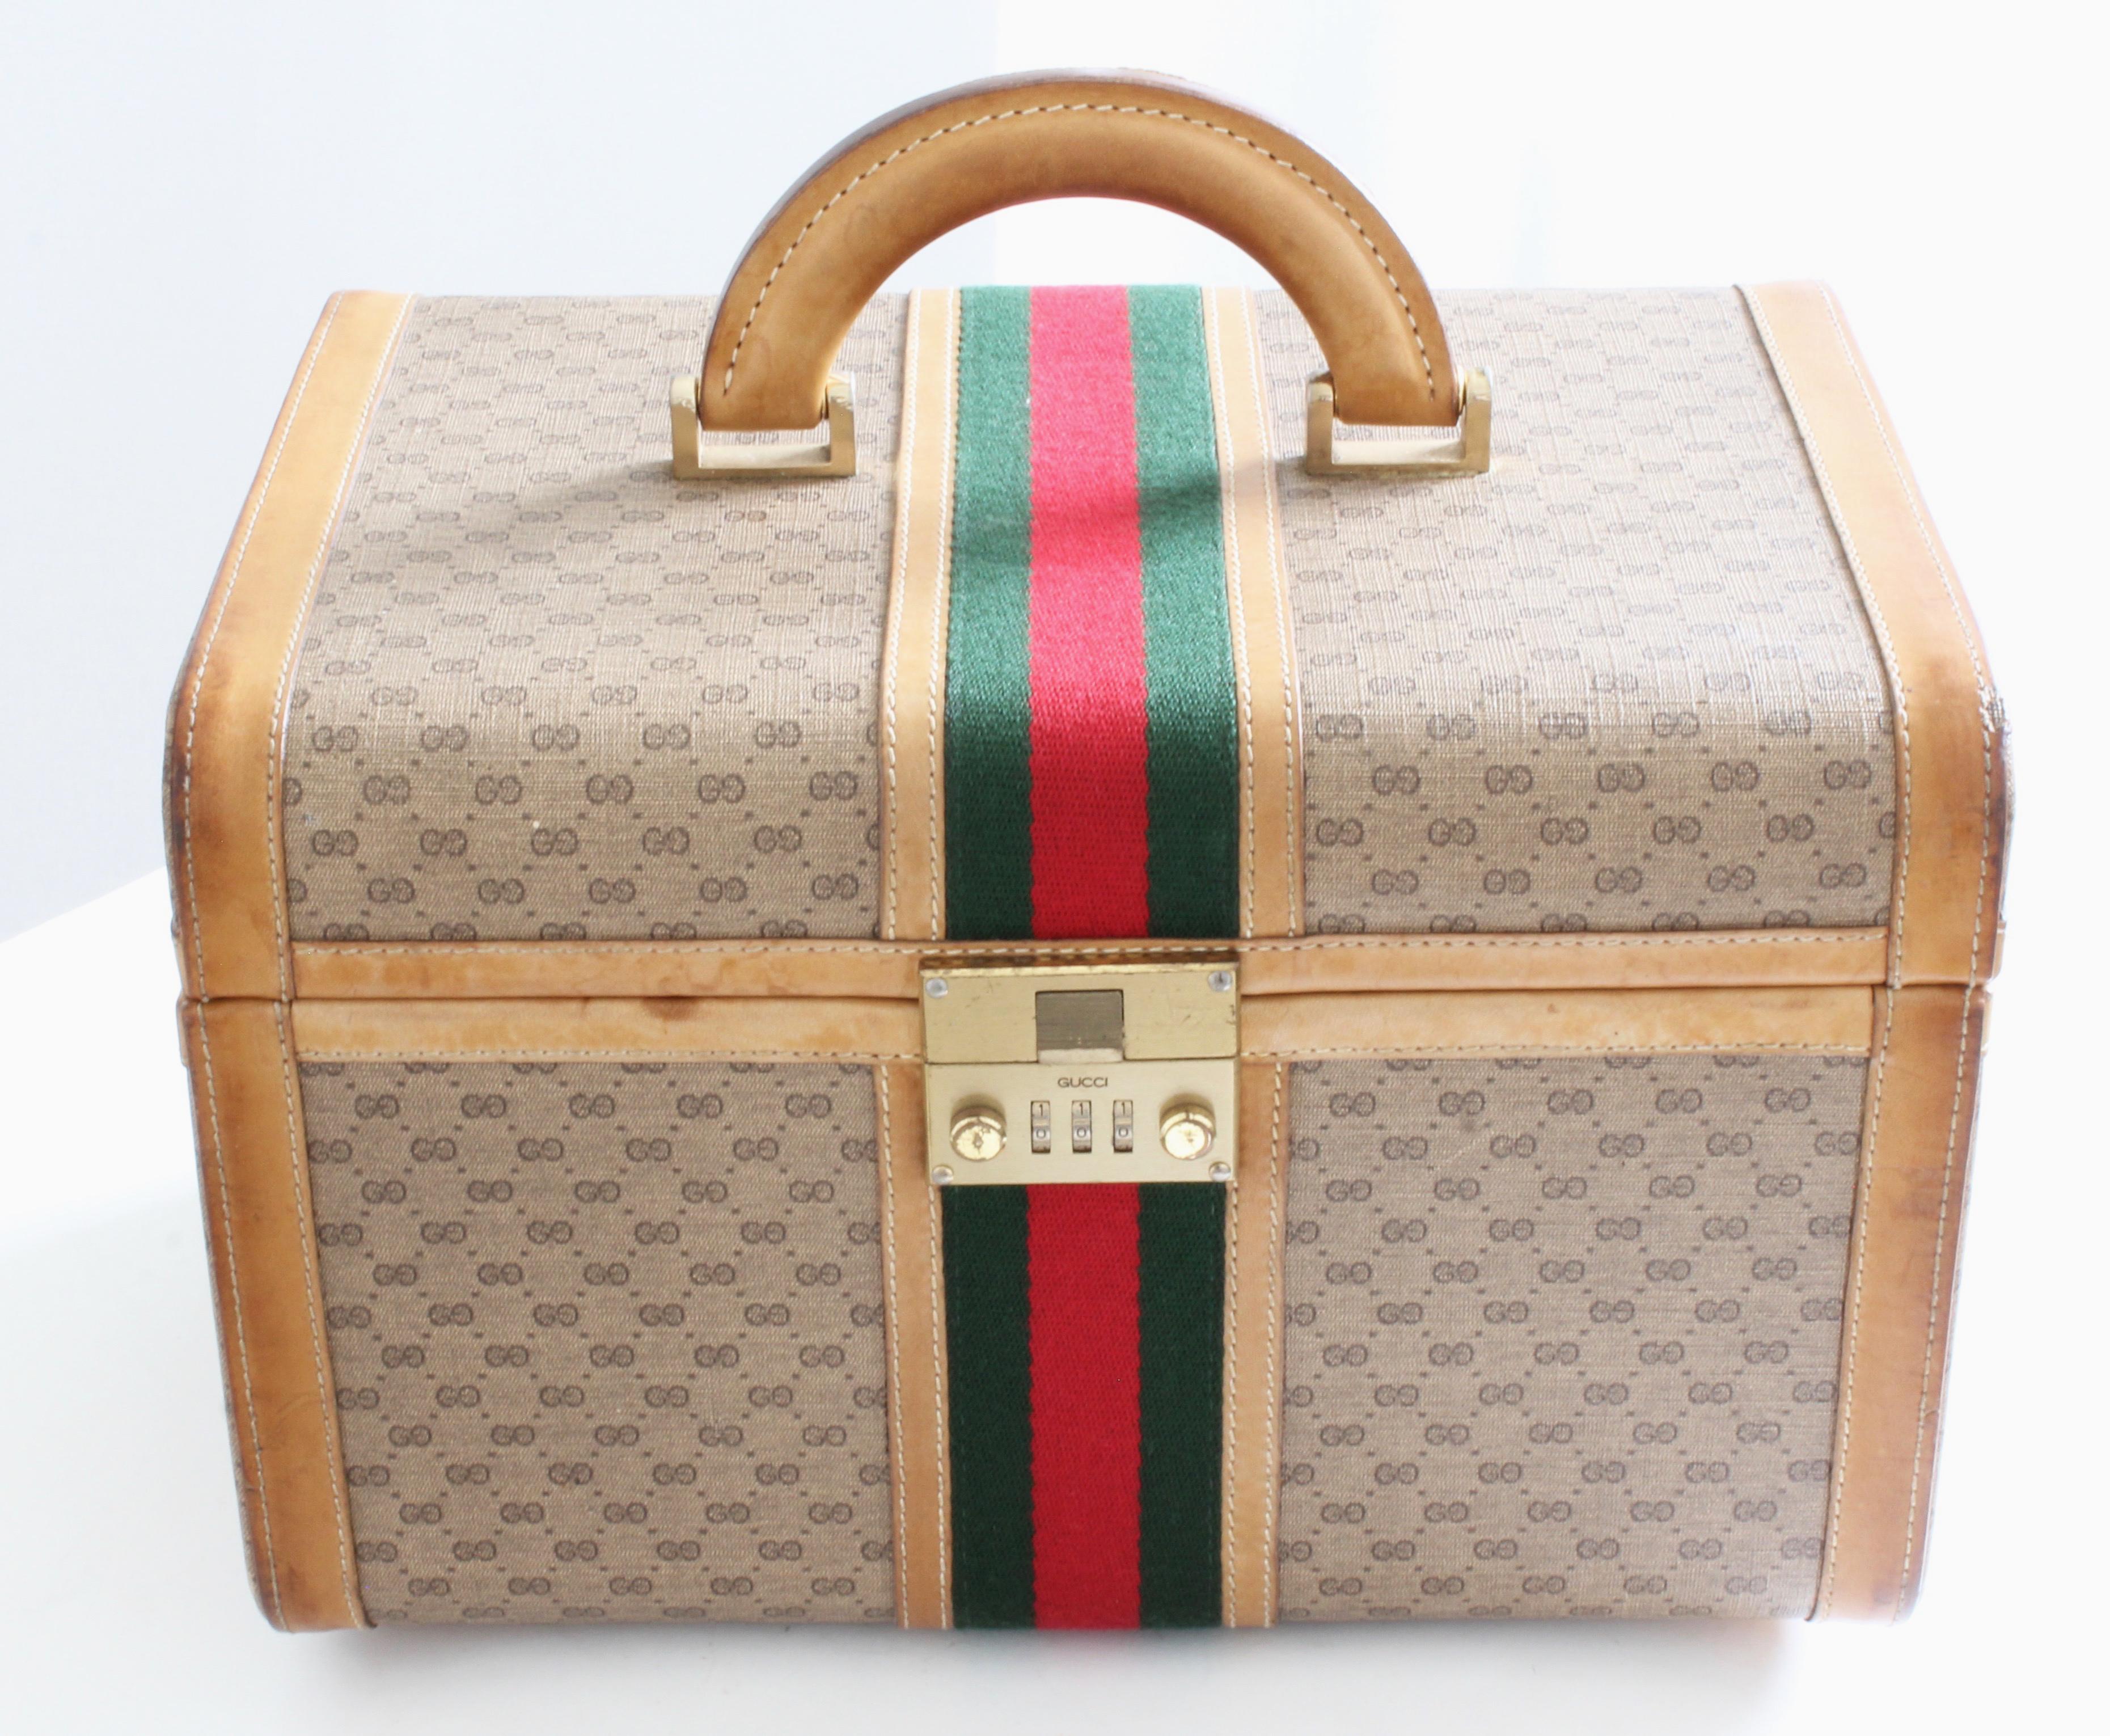 This fabulous vintage train case was made by Gucci, most likely in the early 1980s.  Made from their small GG logo canvas, it's trimmed in light saddle leather and features Gucci's iconic webbing at the center.  Fastens with a combination lock (set